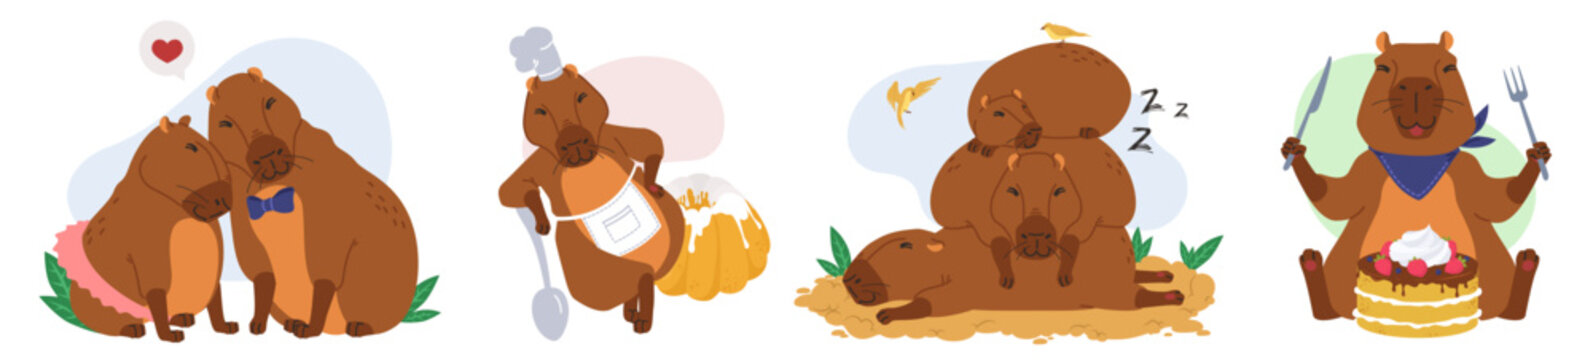 Happy capybara characters doing different things set